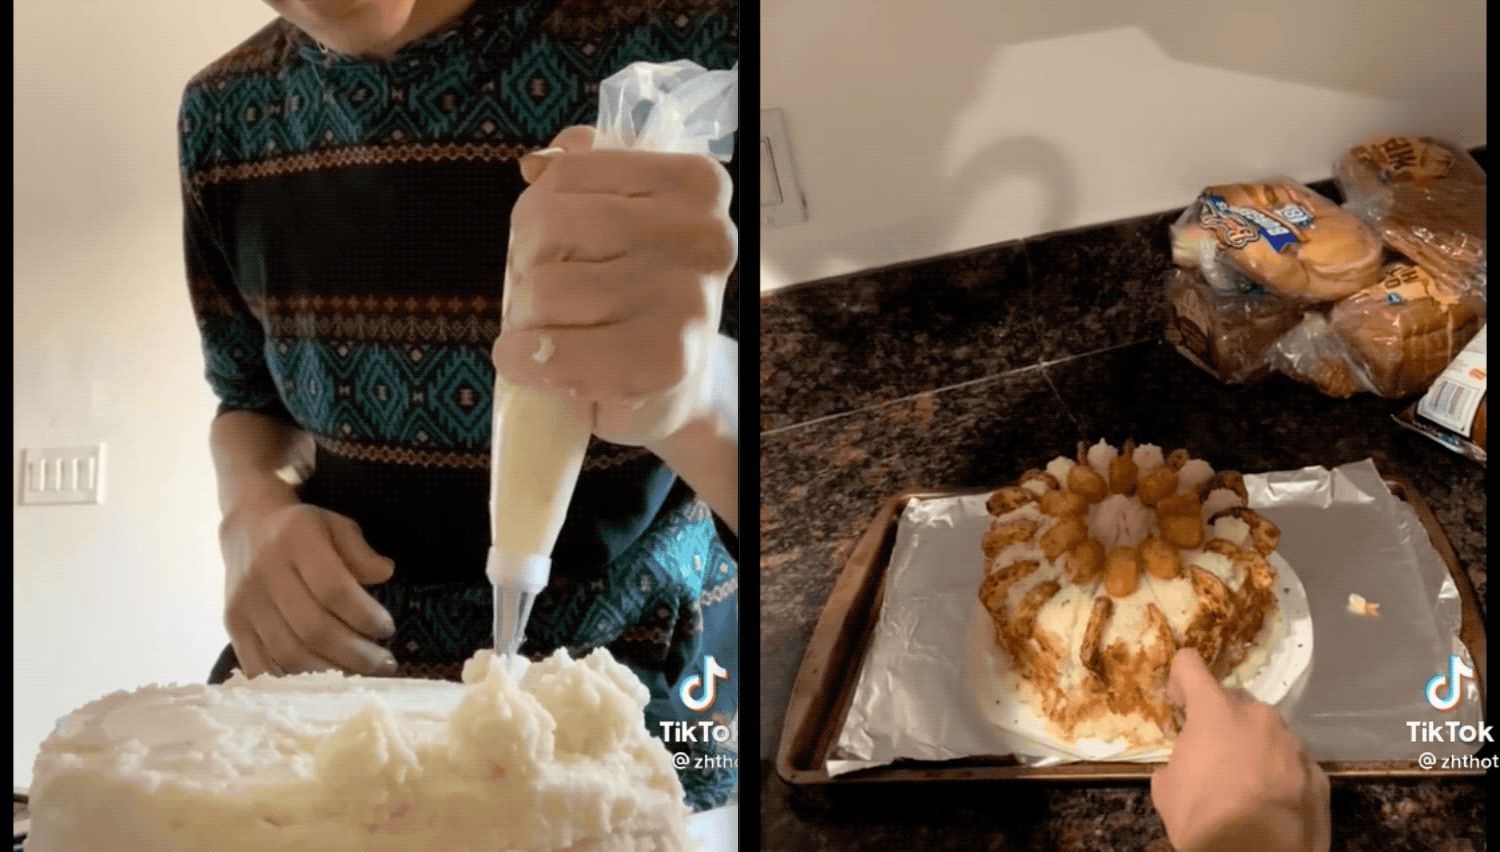 Two side-by-side gifs of a TikTok. On the left, a young man decorates a mound of potatoes with a piping bag. On the right, he cuts into a potato cake decorated with hash brown flakes.